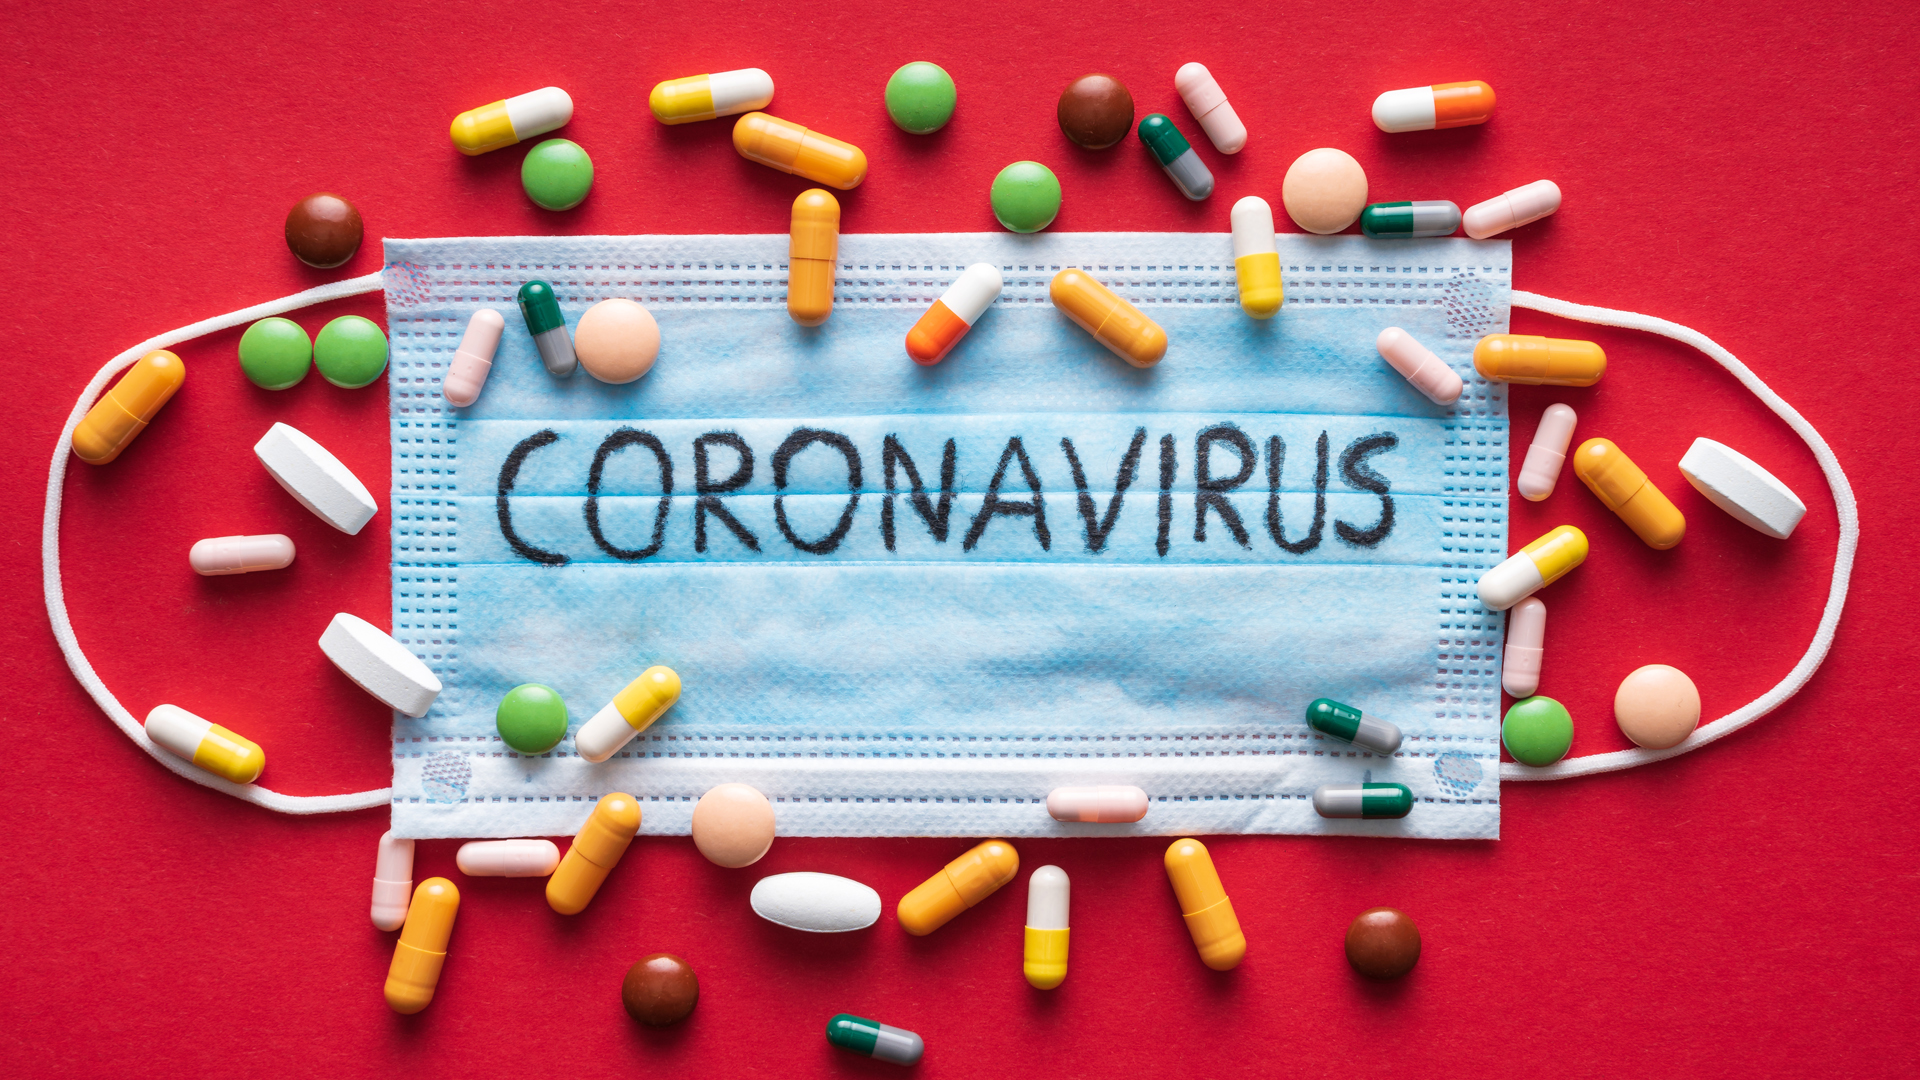 Could azithromycin or doxycycline prevent NHS workers from developing COVID-19?